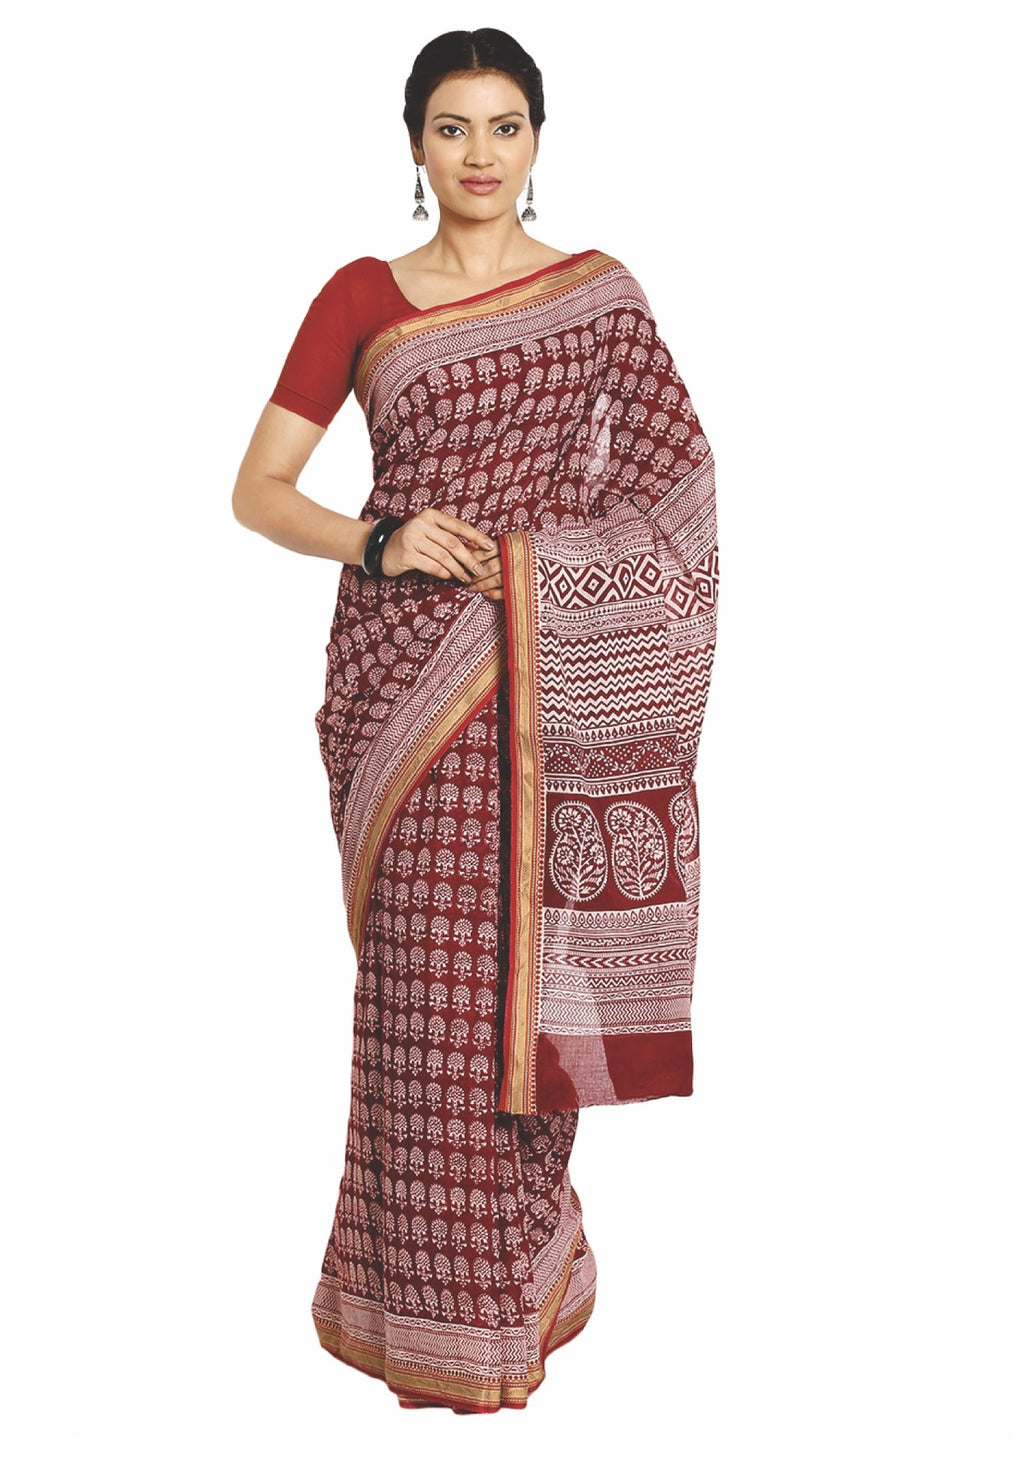 Red Cotton Hand Block Bagh Print Handcrafted Saree-Saree-Kalakari India-ZIBASA0073-Bagh, Cotton, Geographical Indication, Hand Blocks, Hand Crafted, Heritage Prints, Natural Dyes, Sarees, Sustainable Fabrics-[Linen,Ethnic,wear,Fashionista,Handloom,Handicraft,Indigo,blockprint,block,print,Cotton,Chanderi,Blue, latest,classy,party,bollywood,trendy,summer,style,traditional,formal,elegant,unique,style,hand,block,print, dabu,booti,gift,present,glamorous,affordable,collectible,Sari,Saree,printed, holi